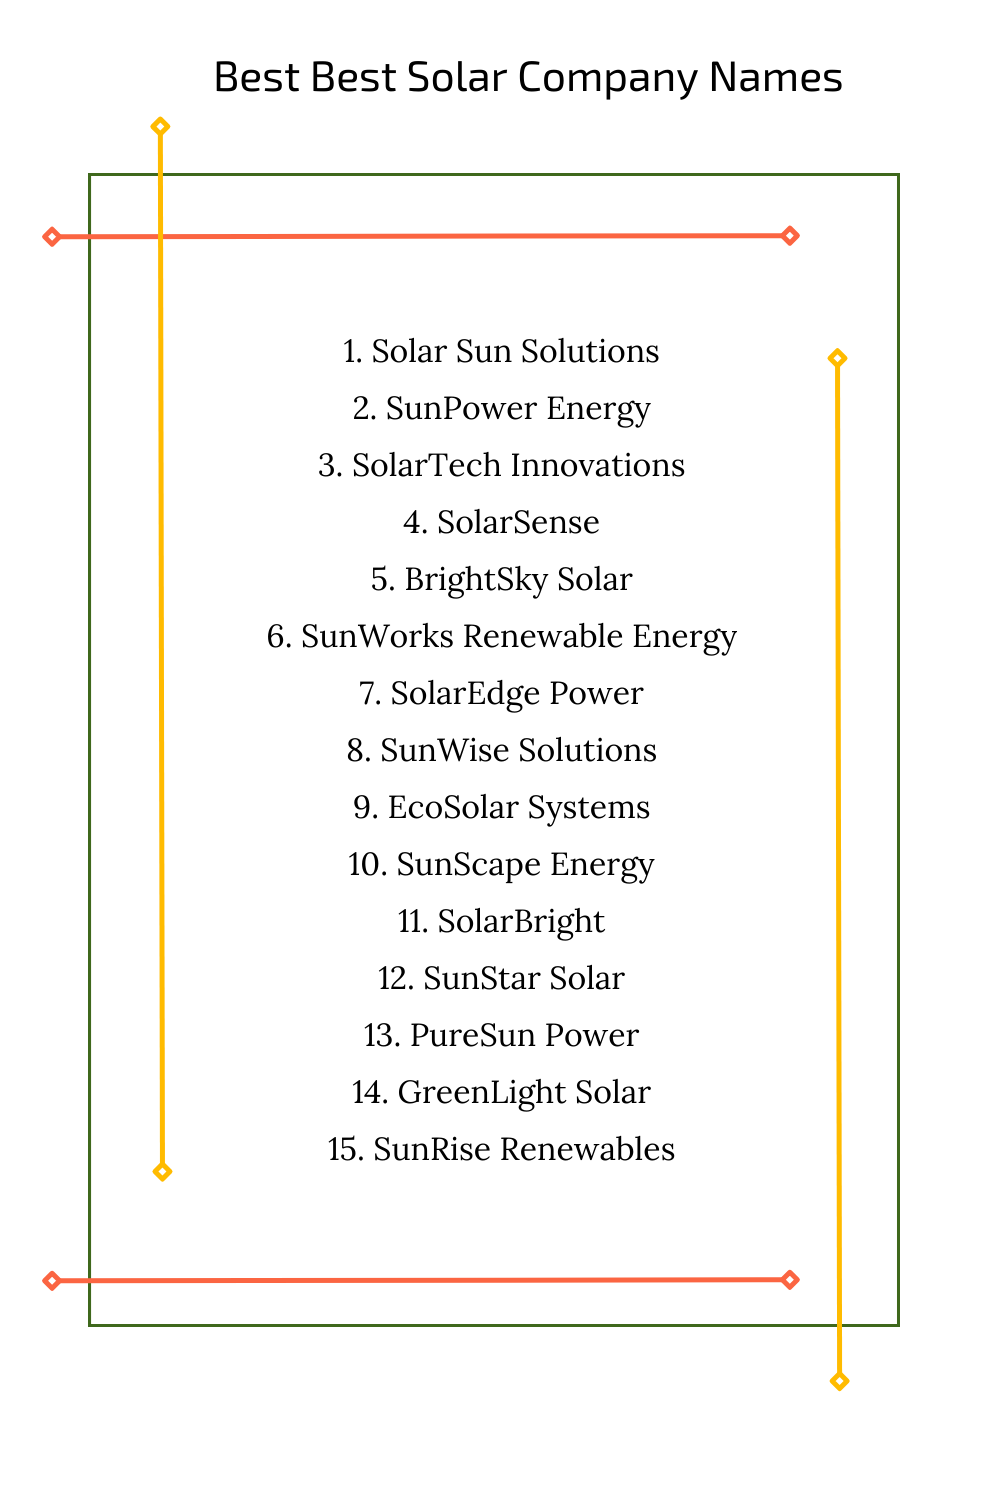 Best Best Solar Company Names